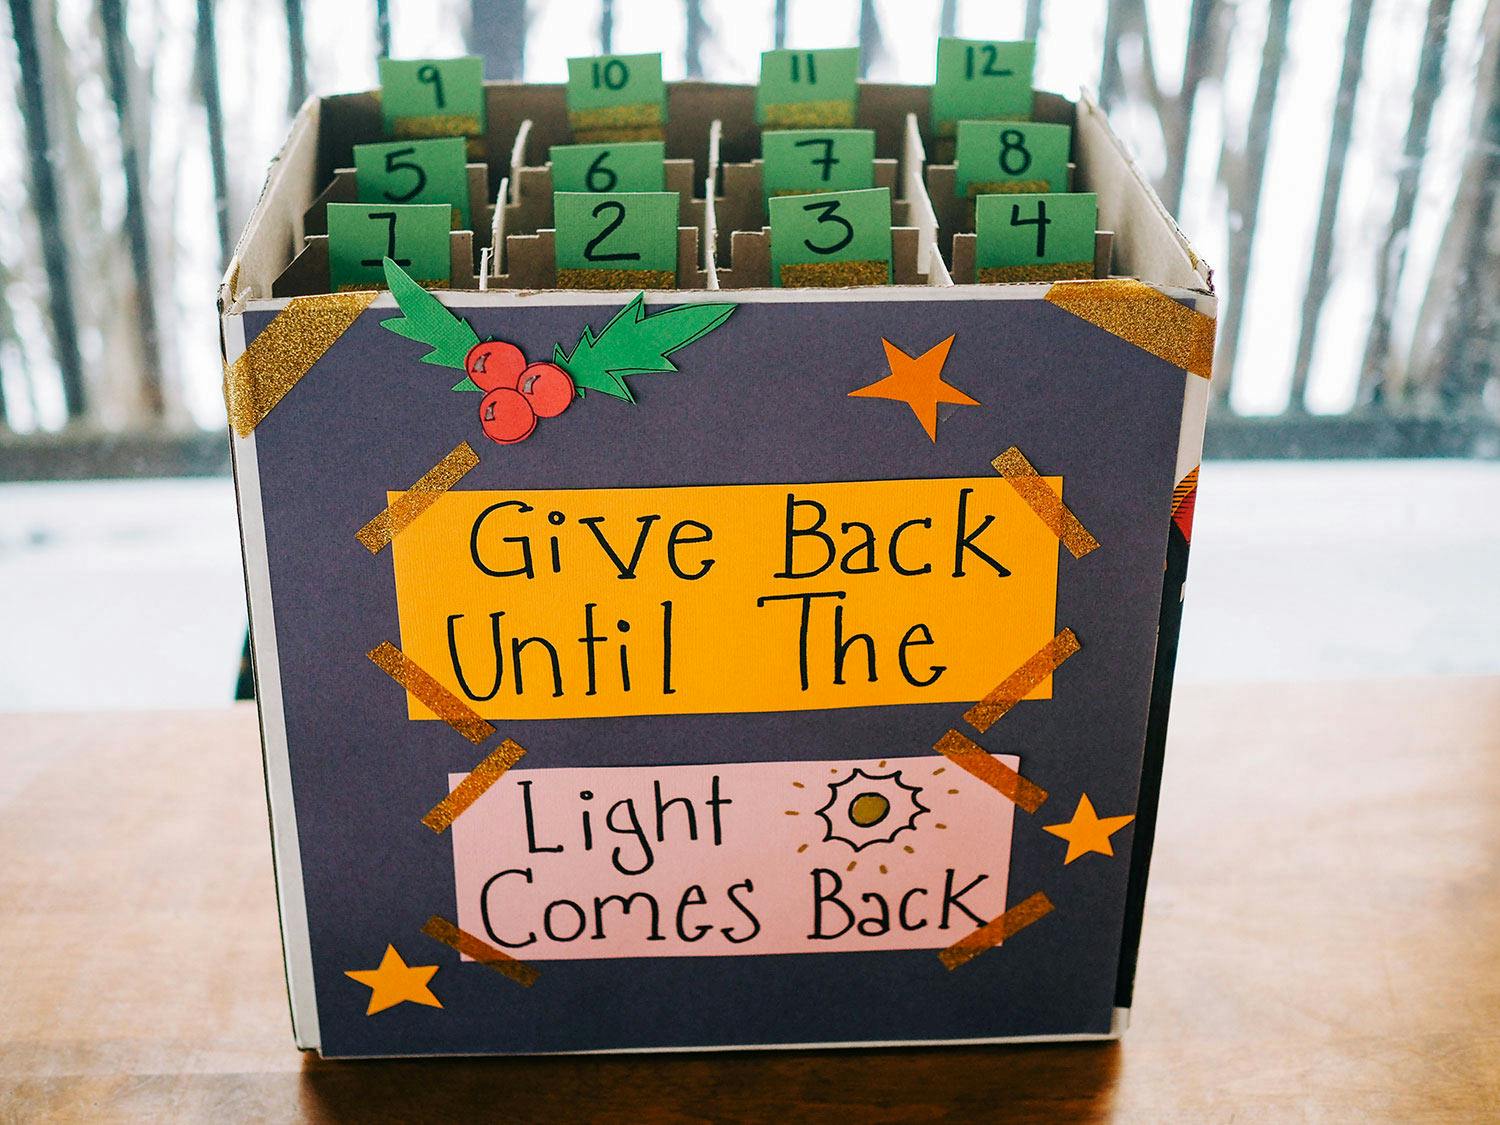 A box with 12 advent calendar-like sections inside decorated with paper stars and holly and labelled “Give Back Until the Light Comes Back.”